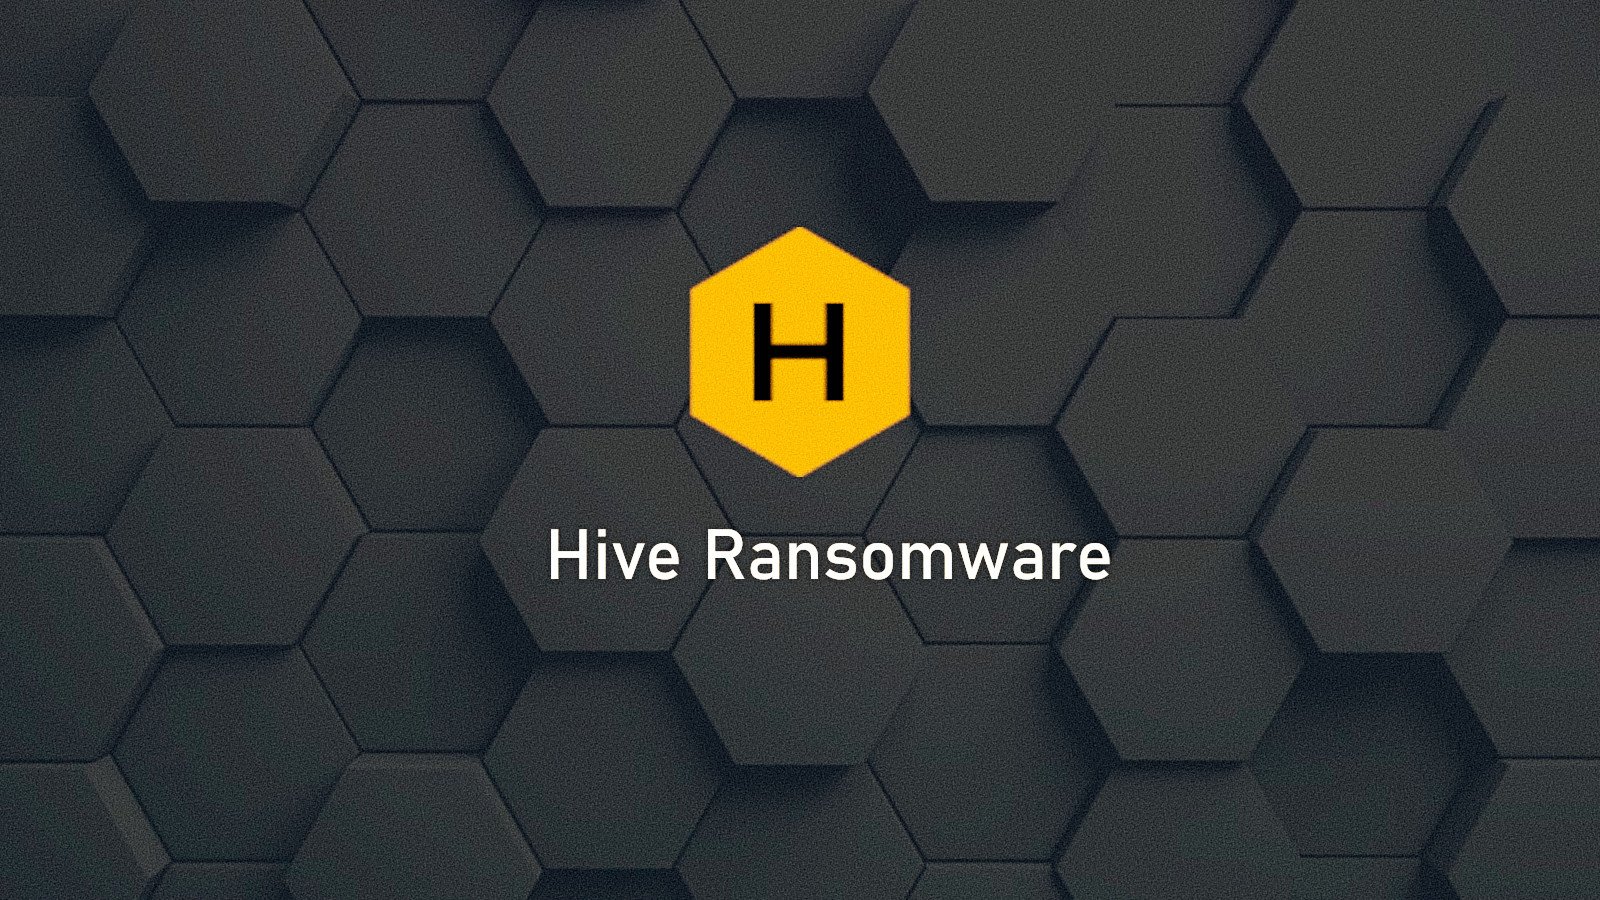 damart-clothing-store-hit-by-hive-ransomware,-$2-million-demanded